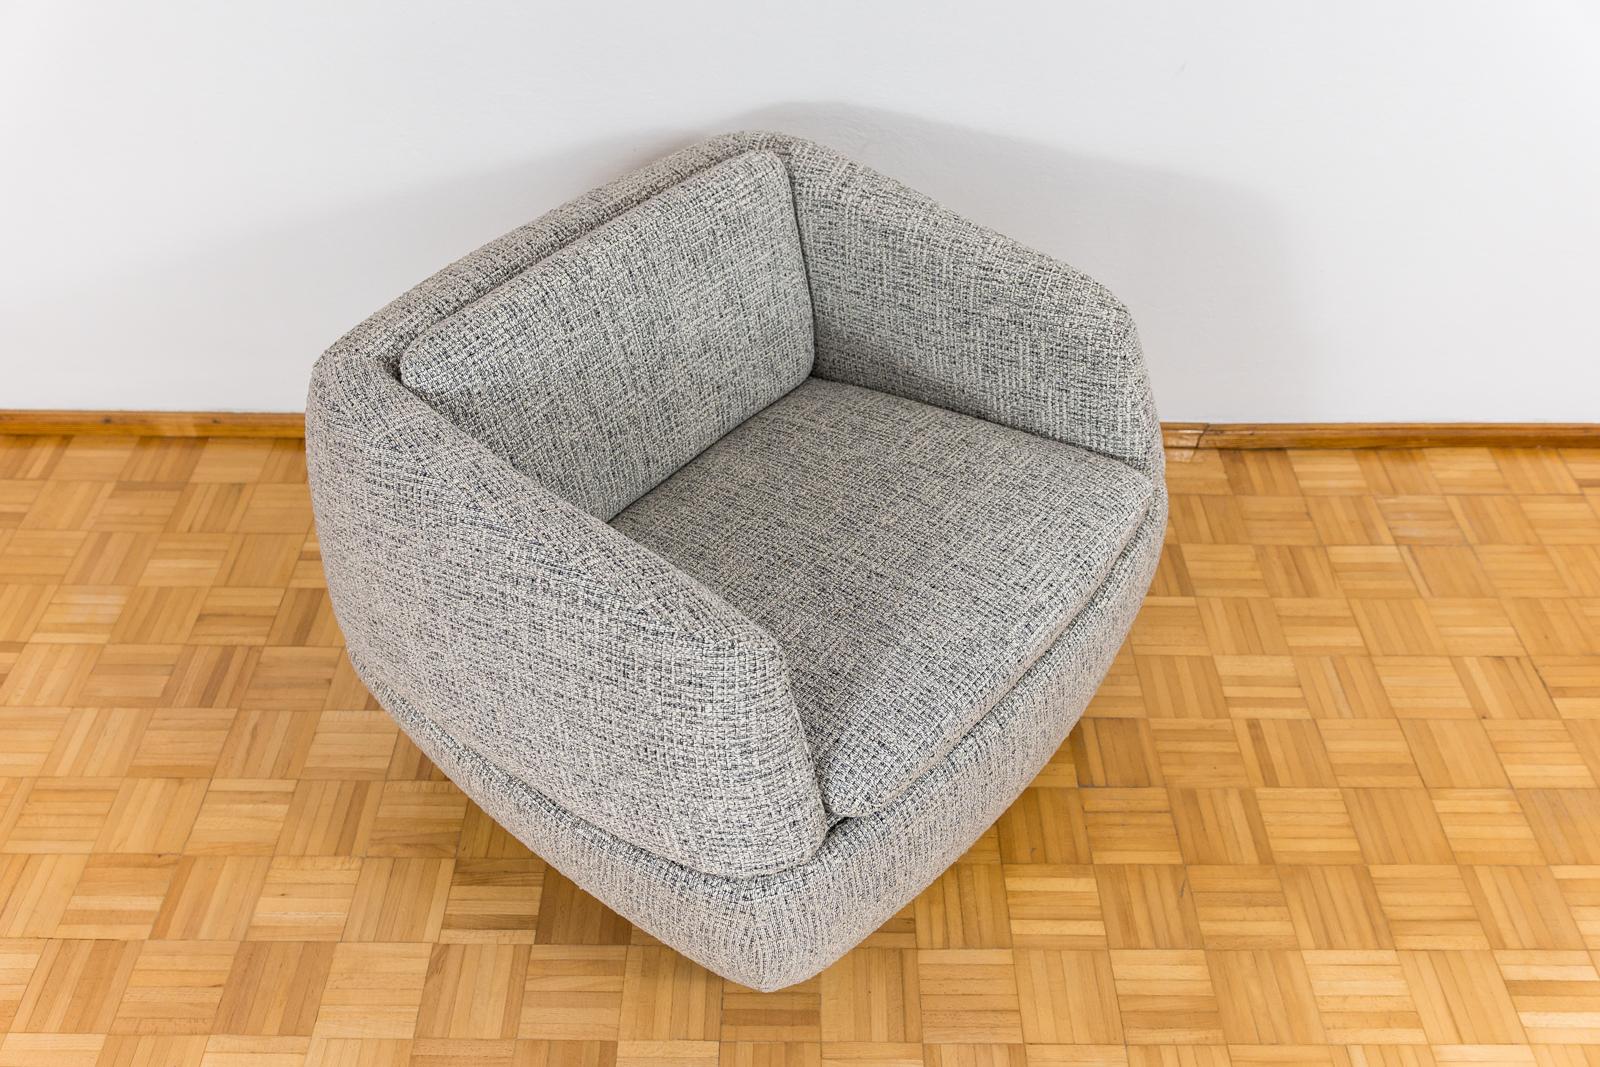 Customizable Space Age Lounge Chair From Lubuskie Fabryki Mebli, 1970s For Sale 8